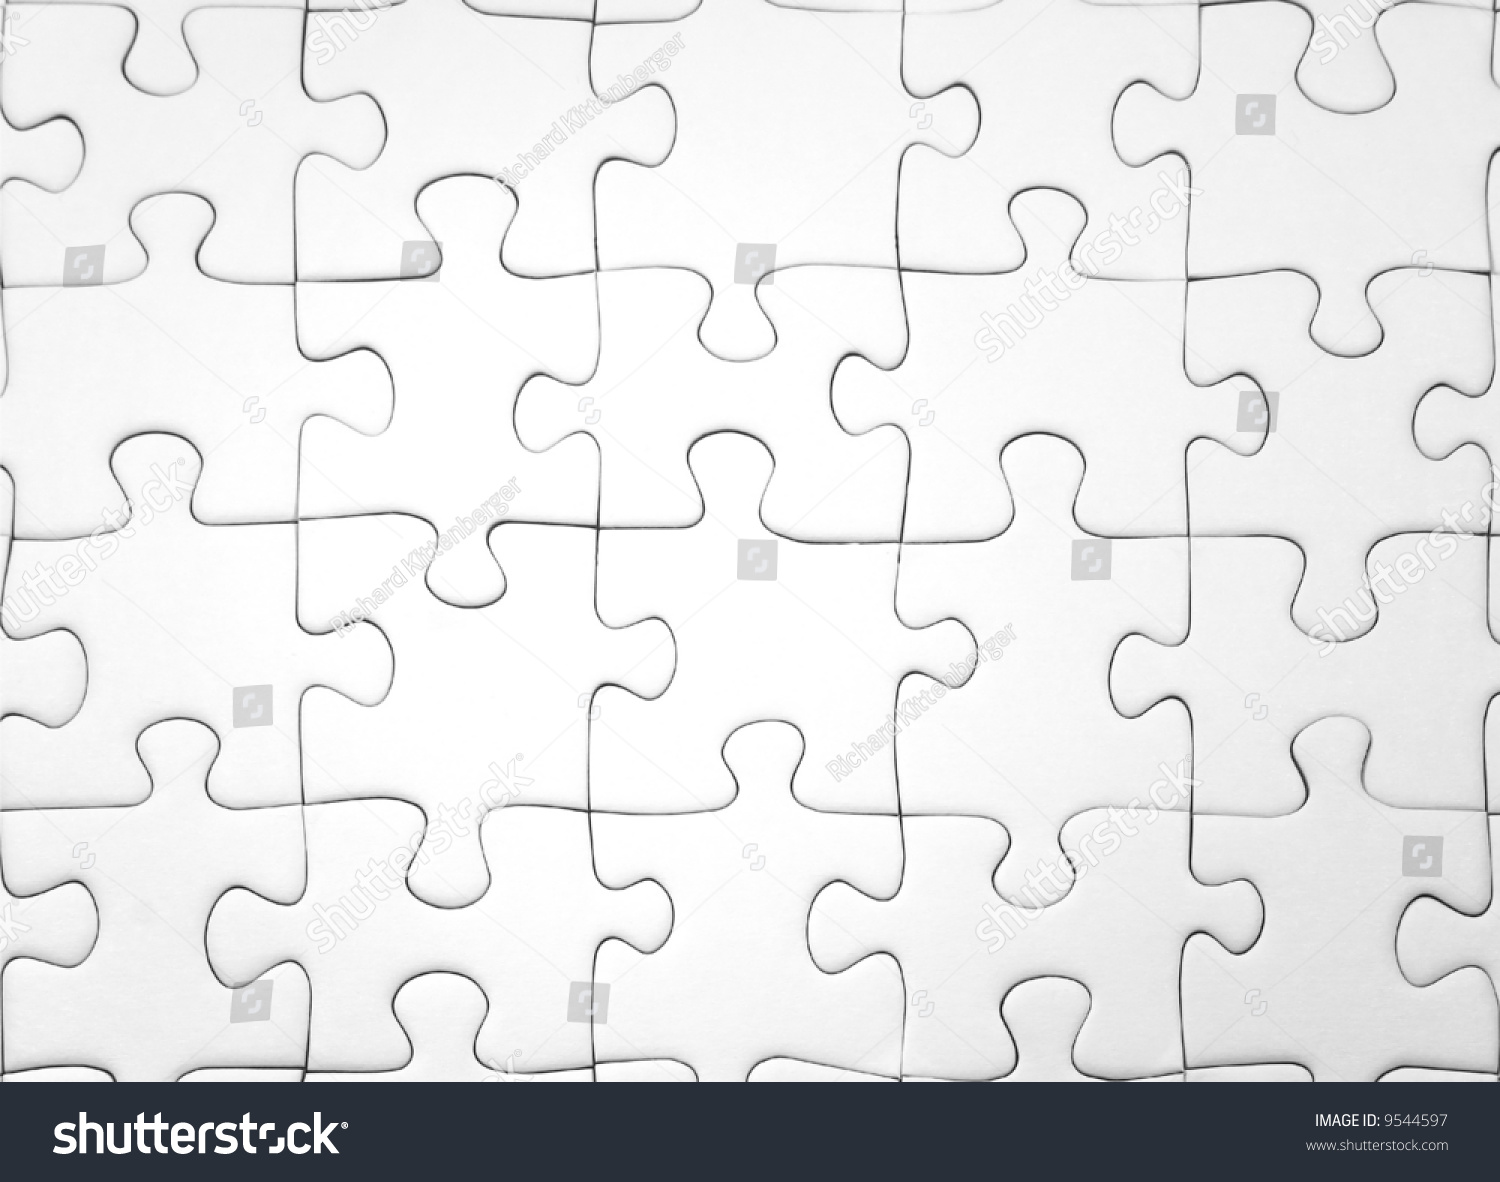 Complete Puzzle Stock Photo 9544597 : Shutterstock